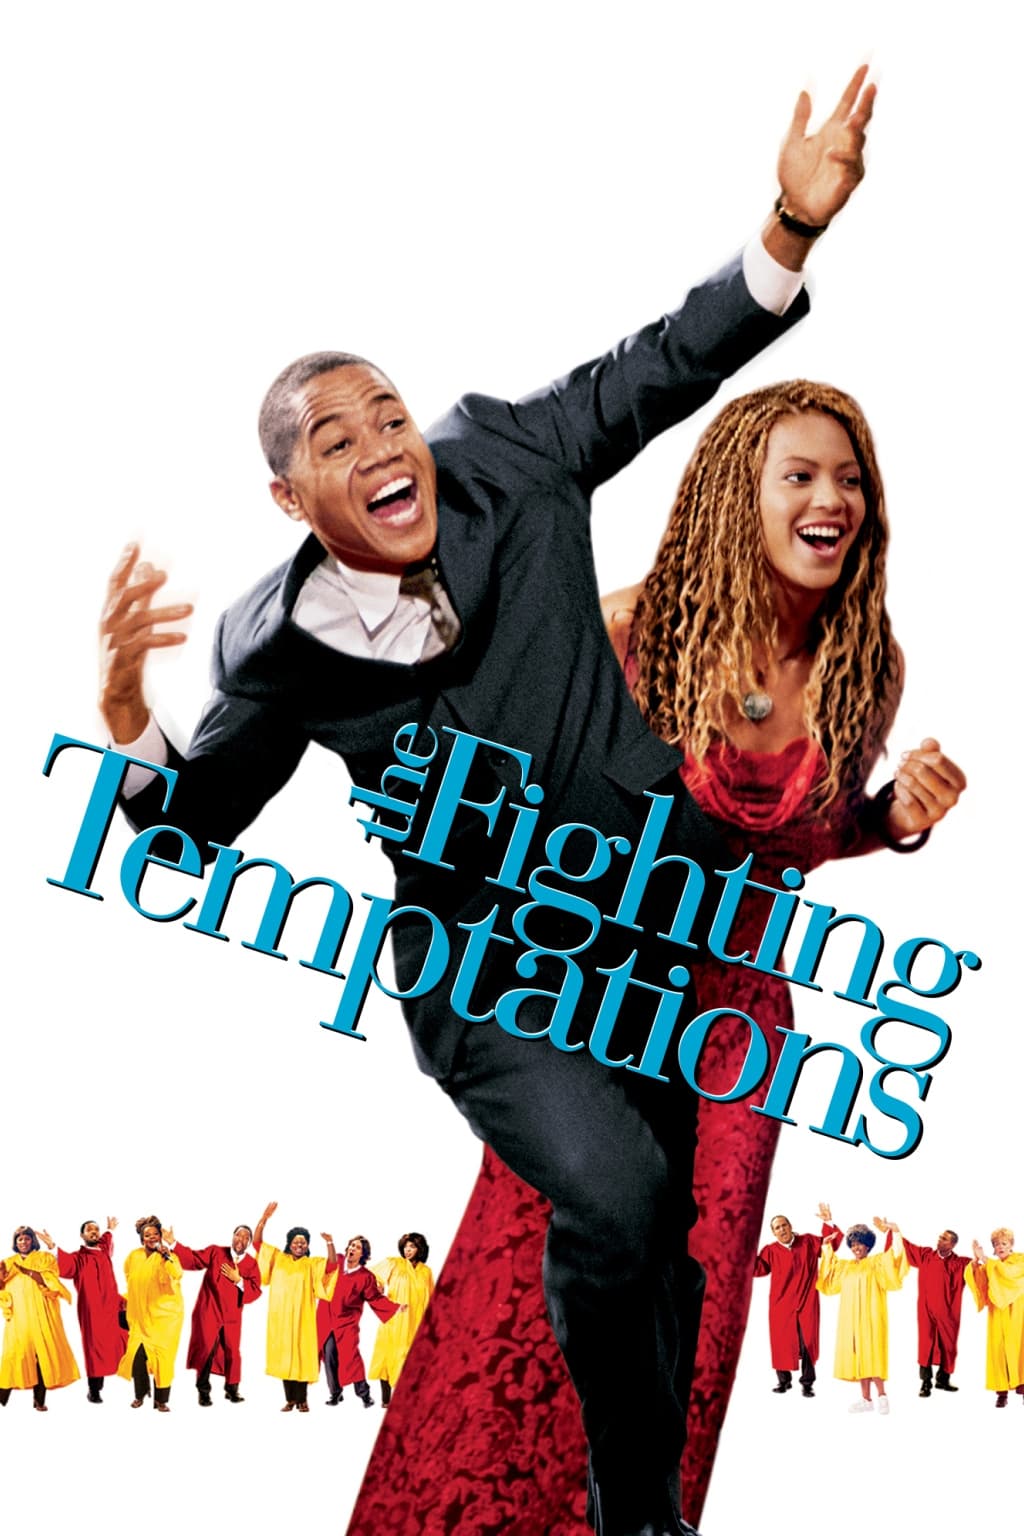 The Fighting Temptations (2003)